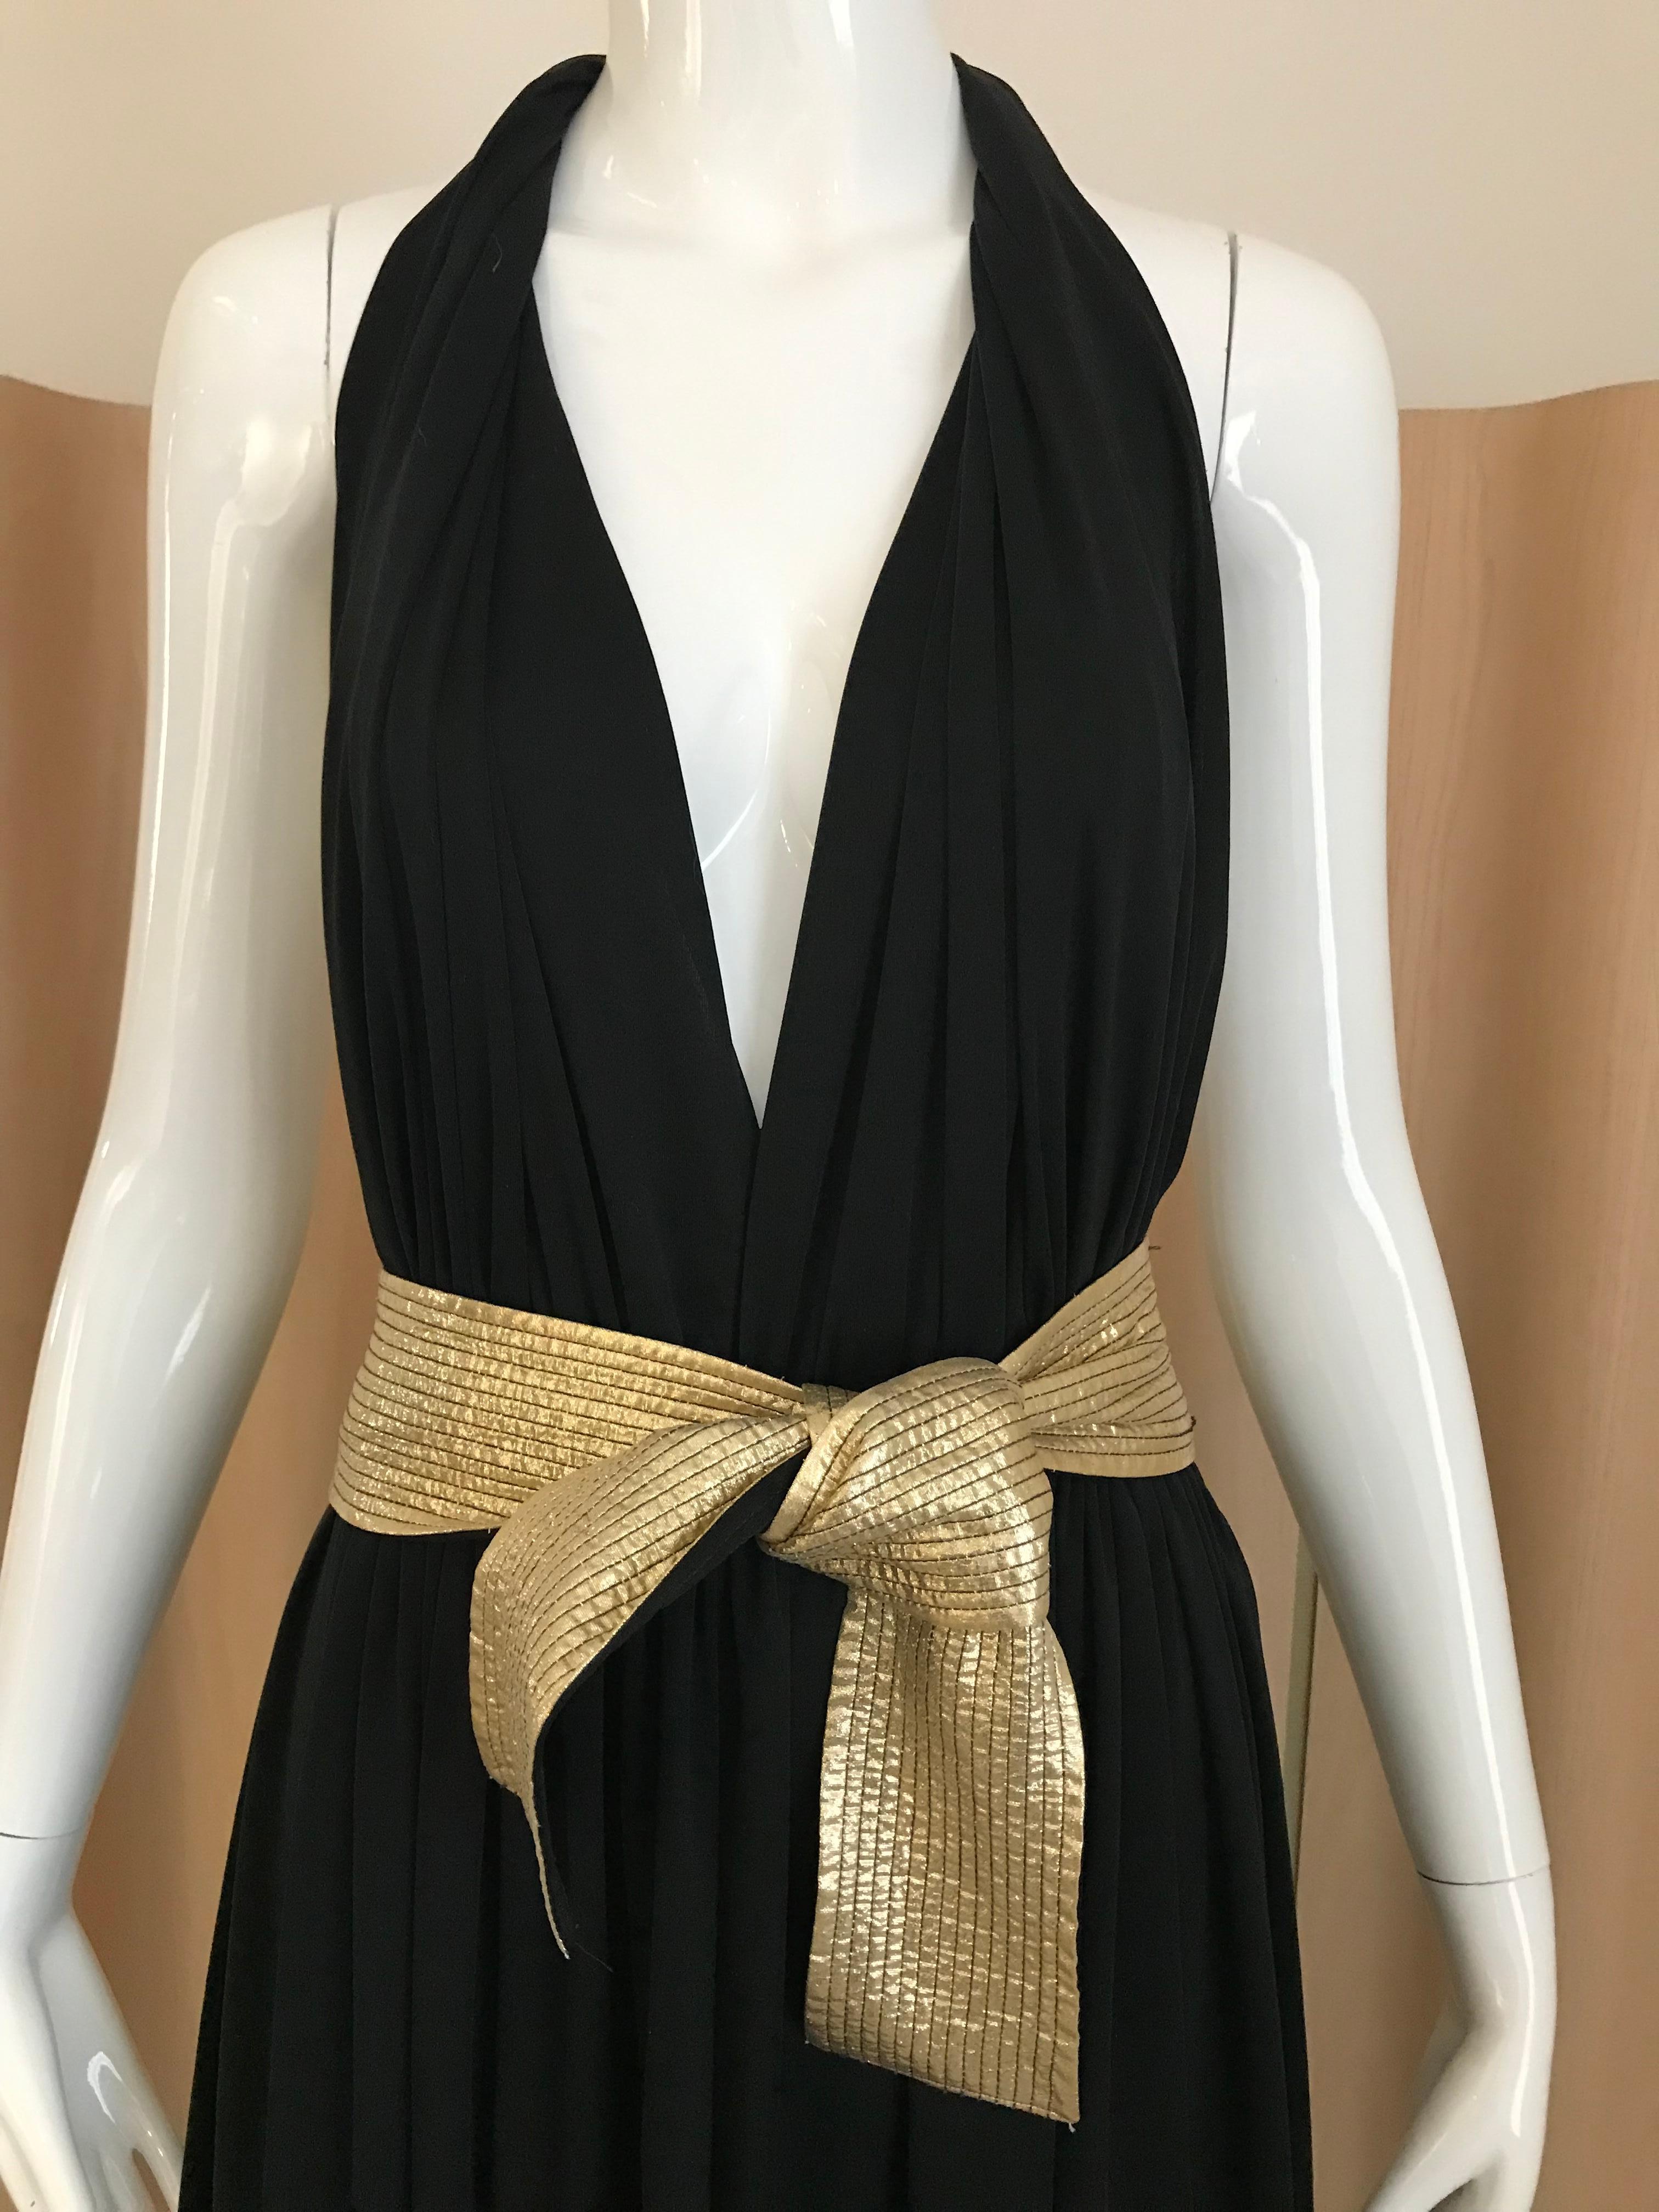 Vintage Black Bill Tice jersey halter dress with plunging neckline and bare back. Dress has gold attached belt/sash.  Perfect for studio 54 party theme .
Fit size small to medium
Bust: 38” / elastic waist : 34 inches/ length : 50 inches